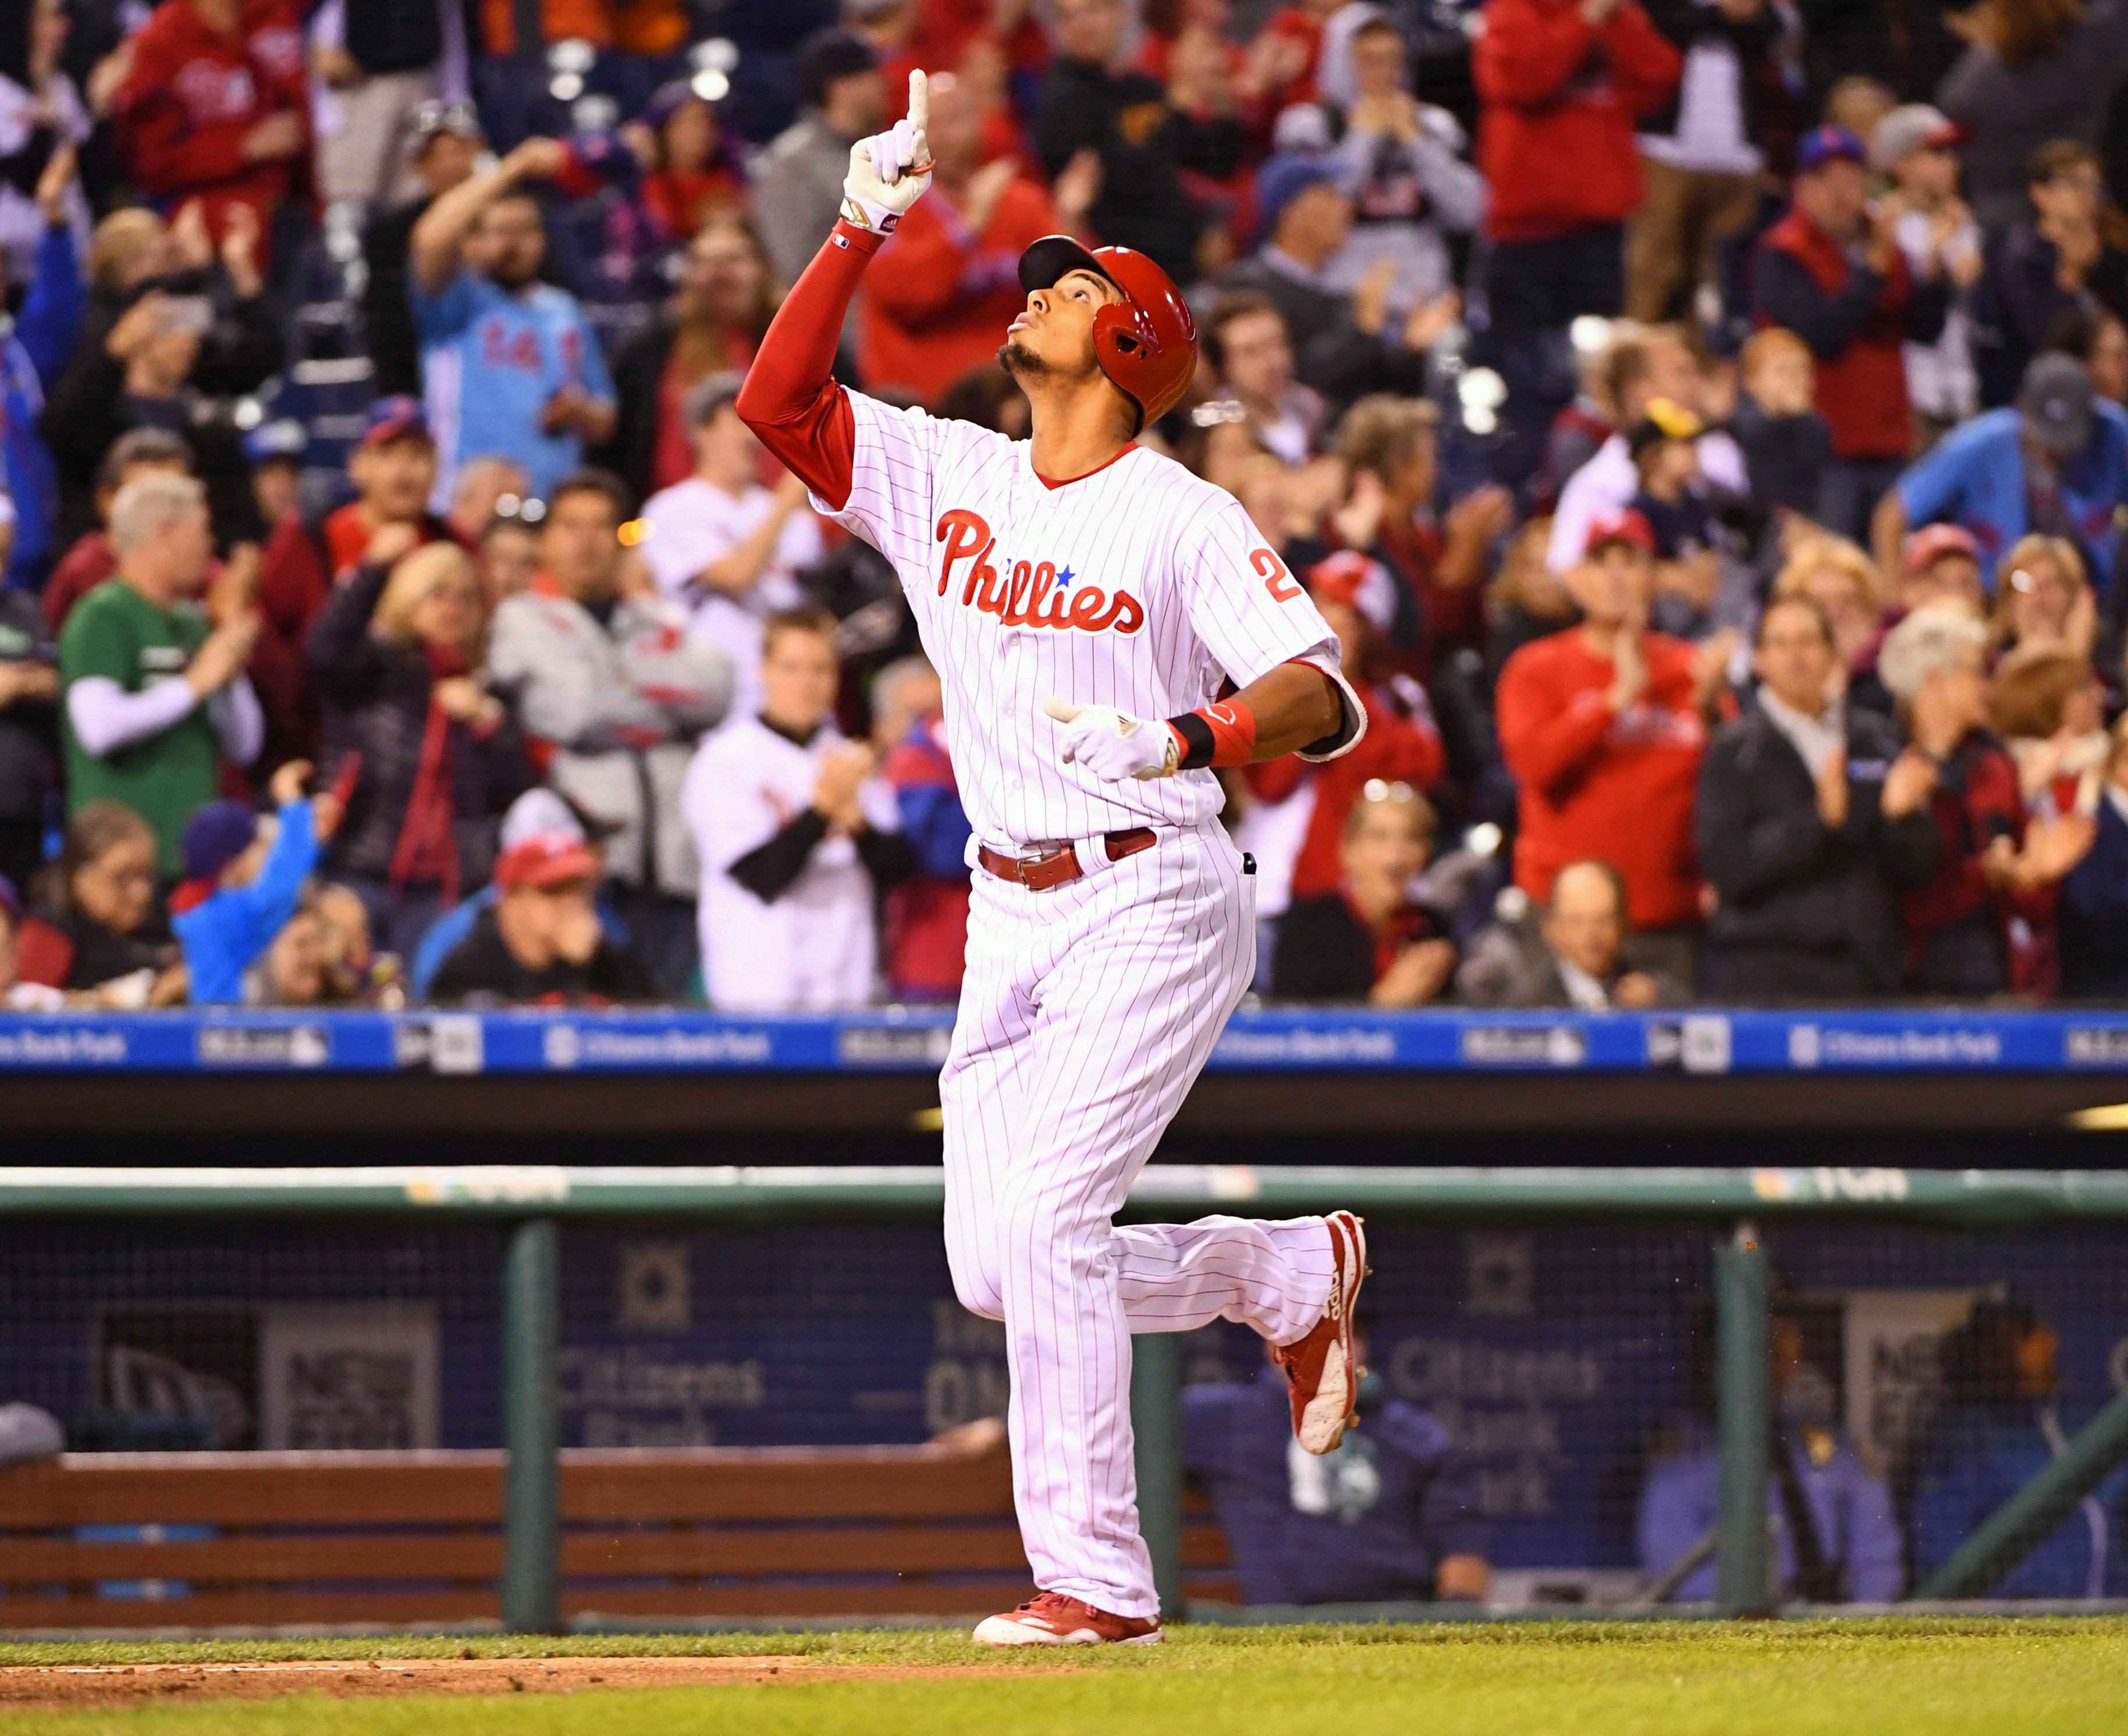 Phillies vs Mariners Live Stream, Start Time, TV Info, and More